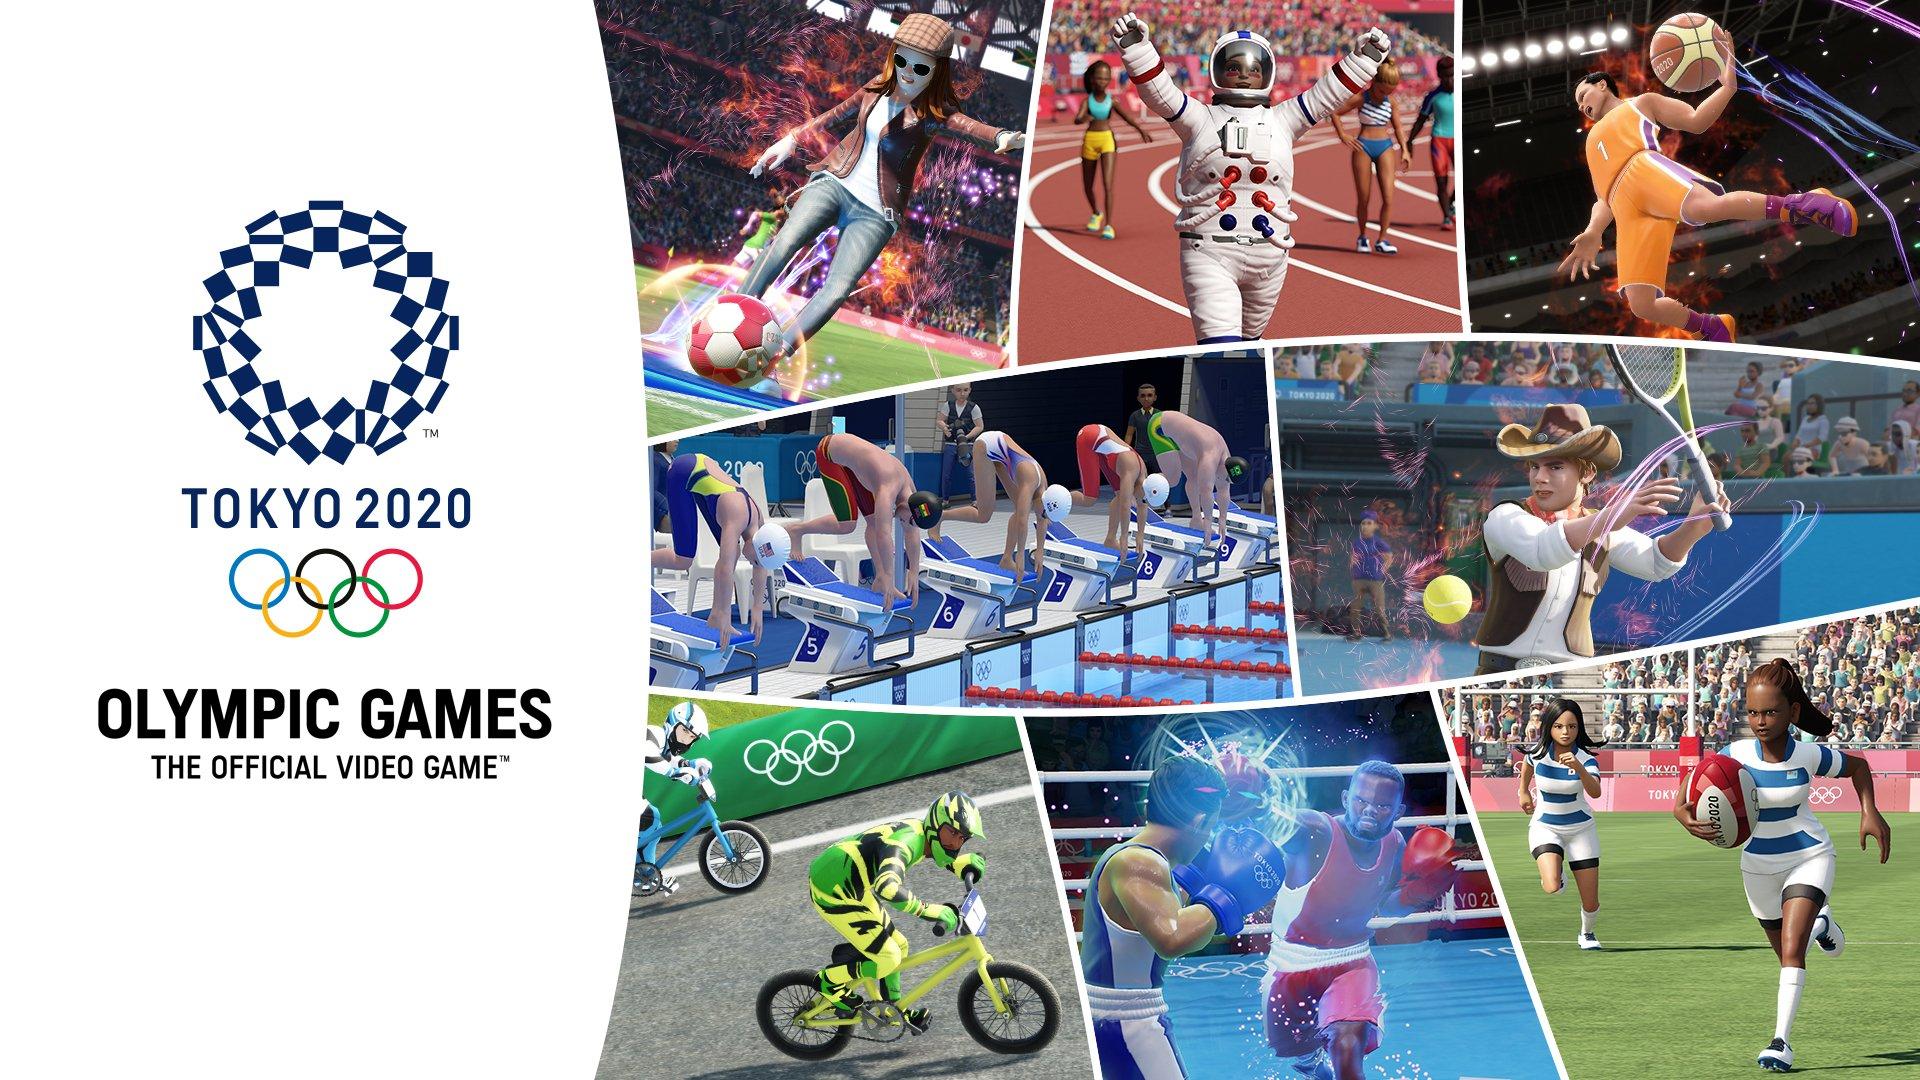 Olympic Games Tokyo 2020: The Official Video Game | Nintendo Switch